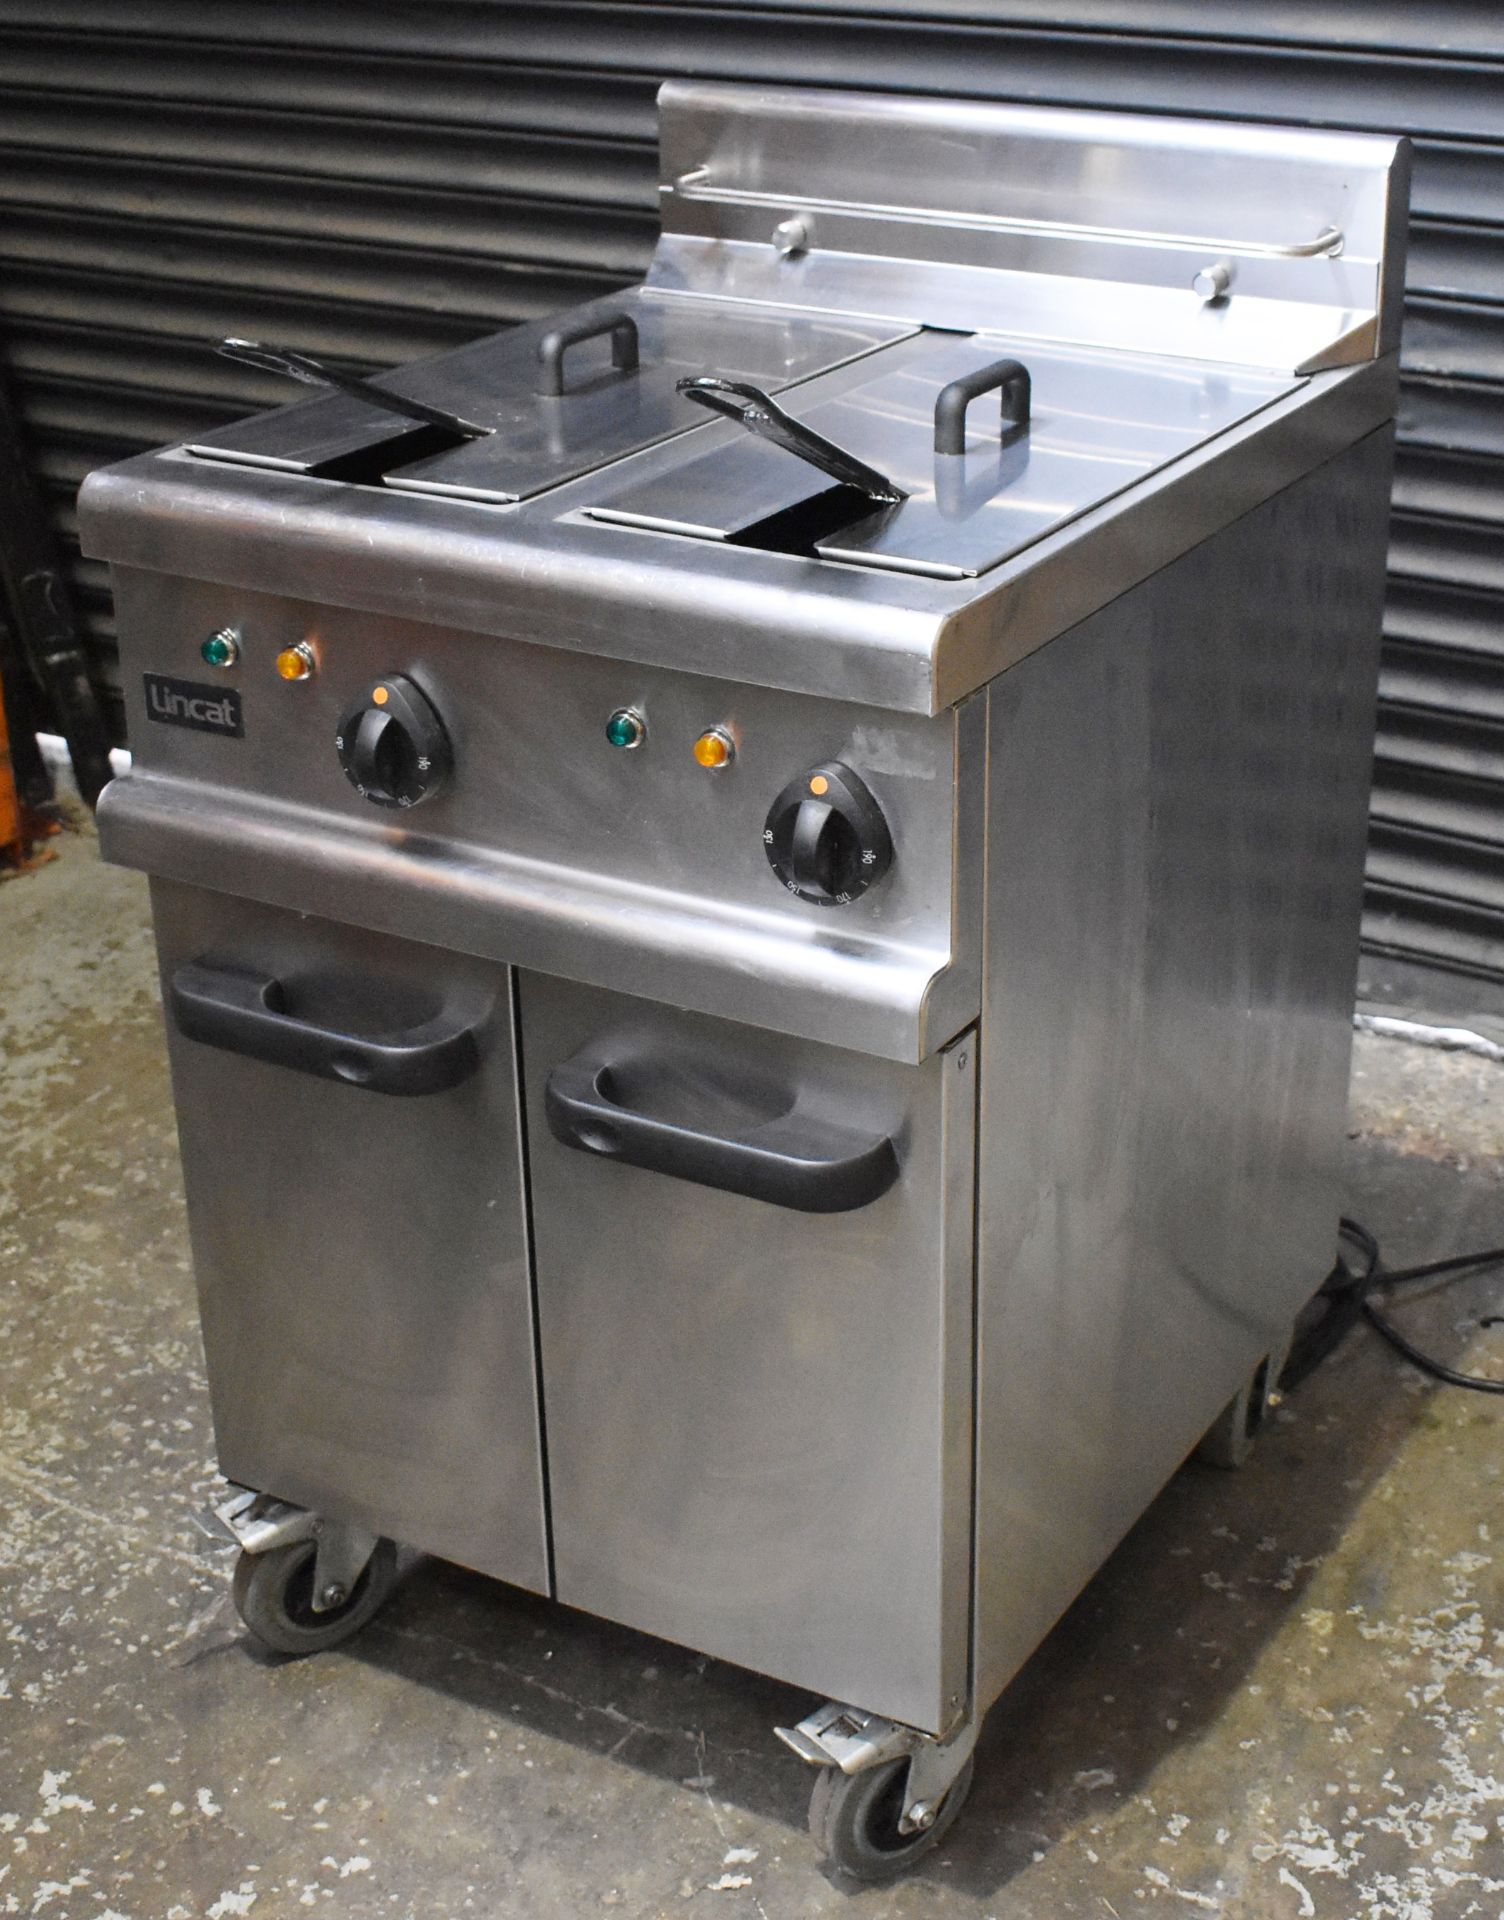 1 x Lincat Opus 700 OE7113 Twin Tank Electric Fryer With Filtration - Includes Baskets - 240V / - Image 2 of 11